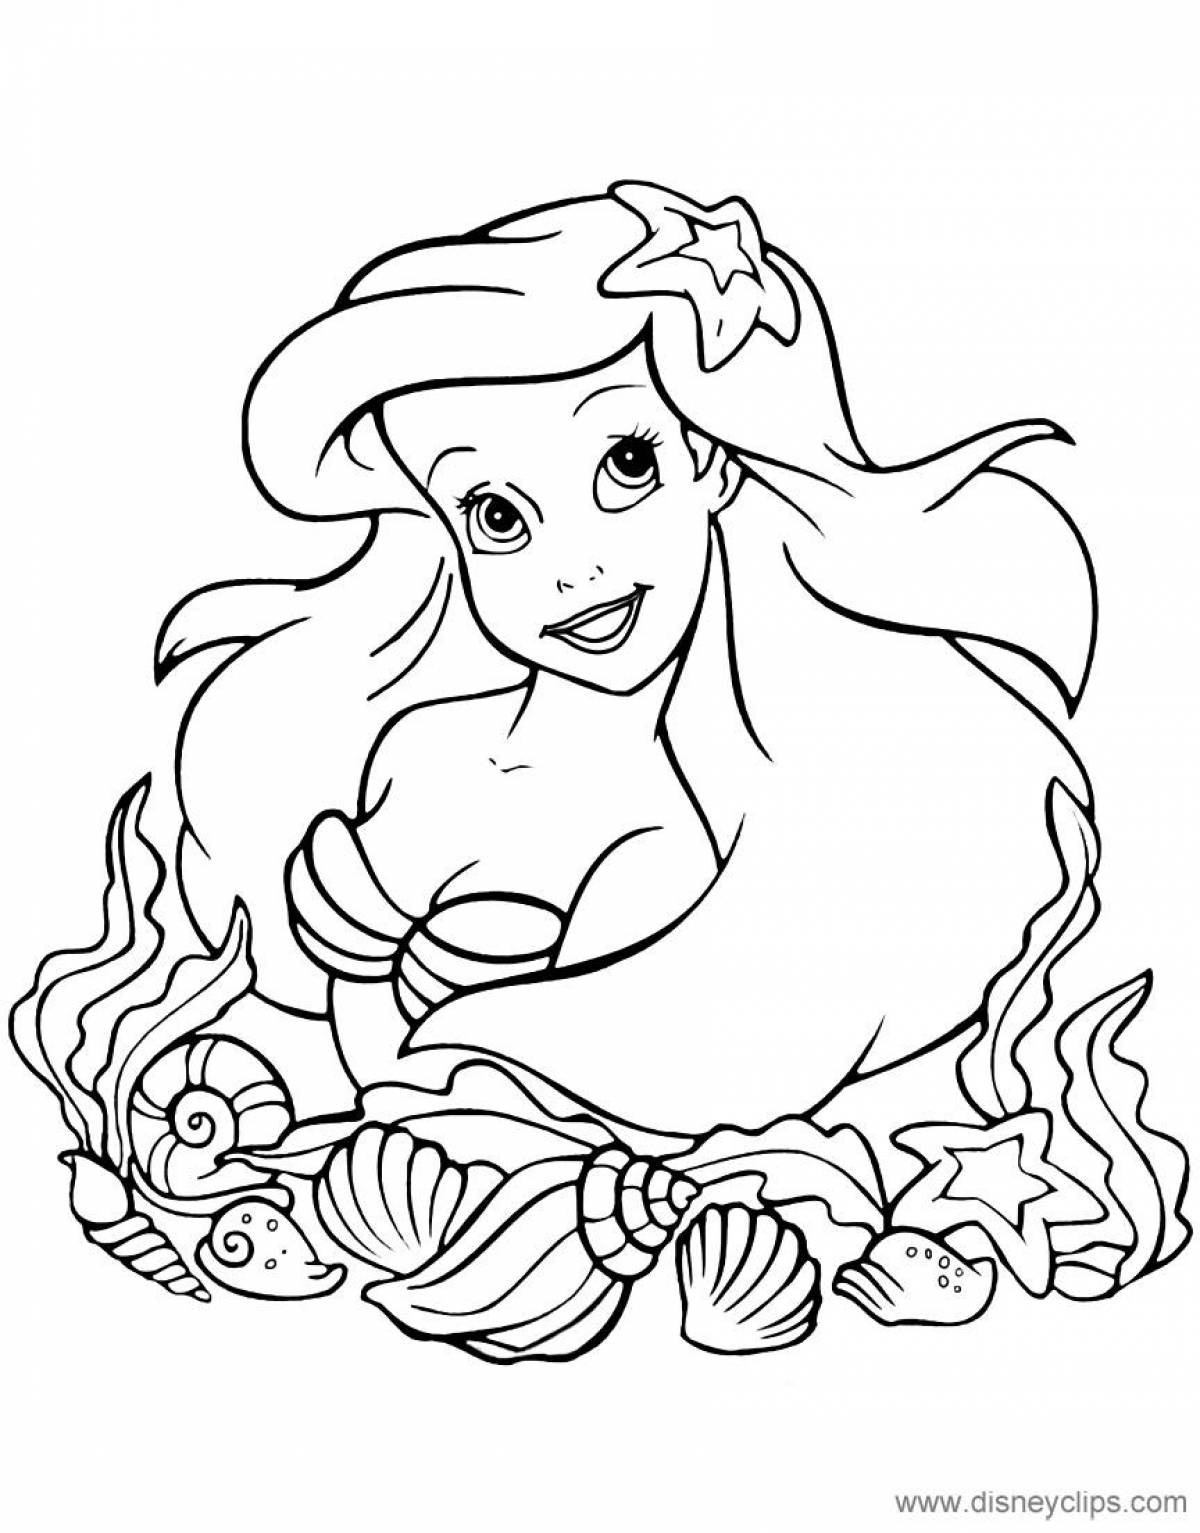 Exotic little mermaid coloring book for kids